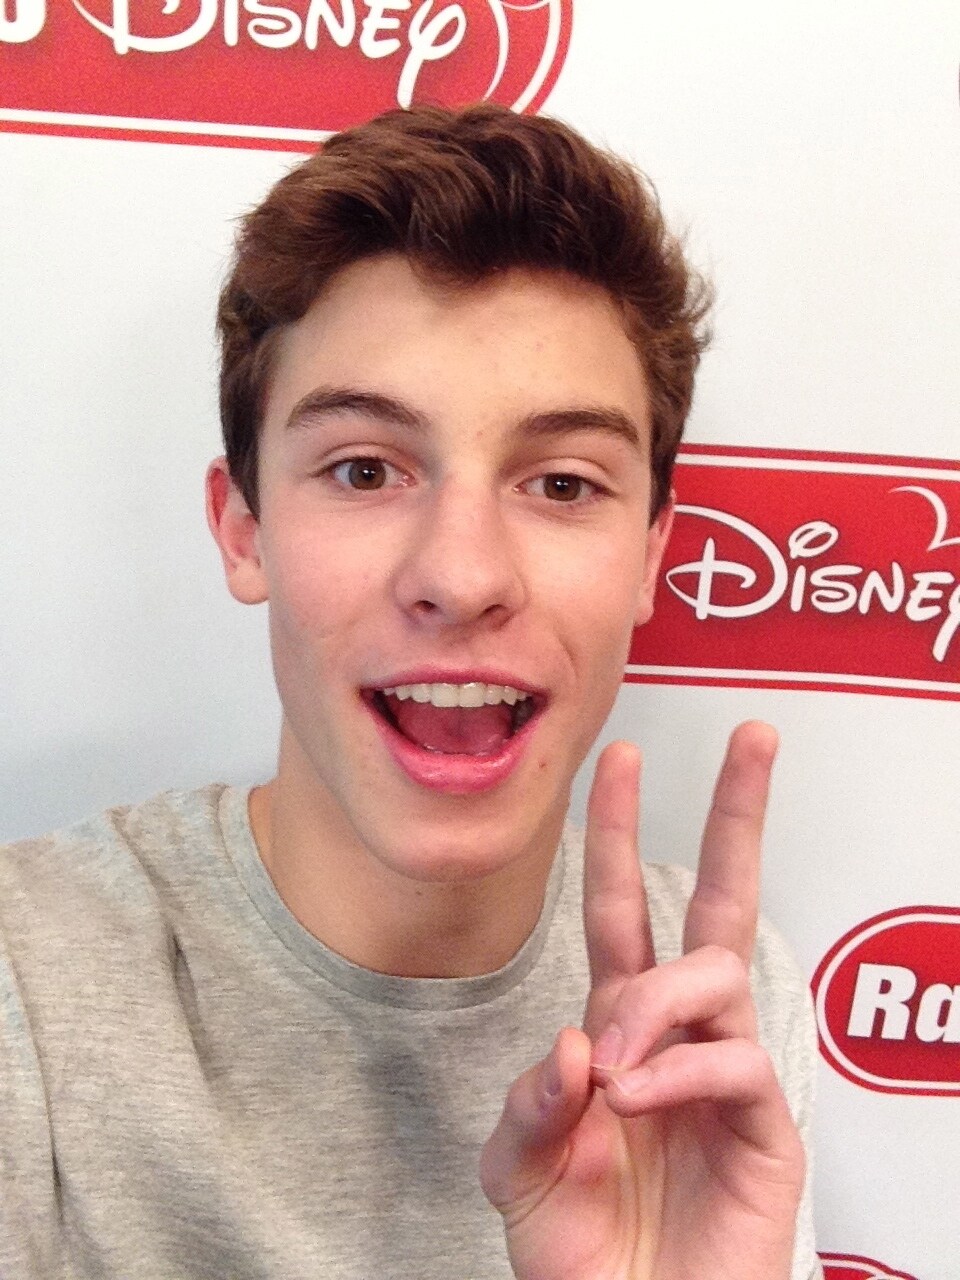 Performer Shawn Mendes